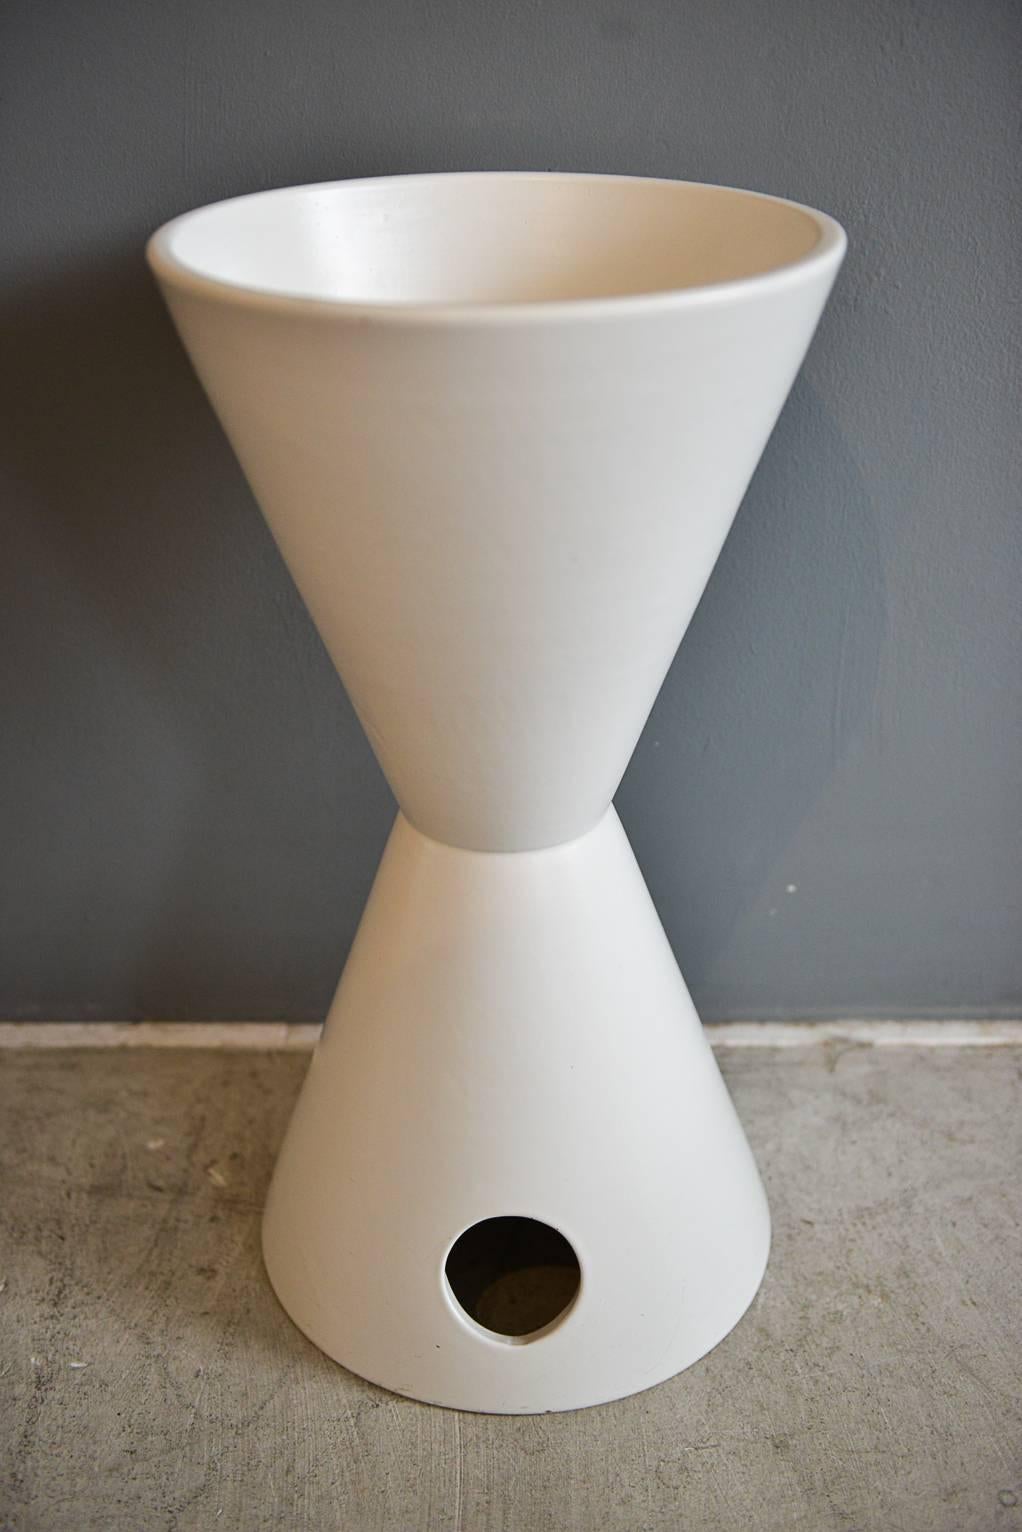 Model TH-02, this planter is designed by Lagardo Tackett for Architectural Pottery. Desirable form, perfect for indoor or outdoor use. Iconic California modern design. White matte glaze.

Some chips on bottom edge, see photos otherwise very good